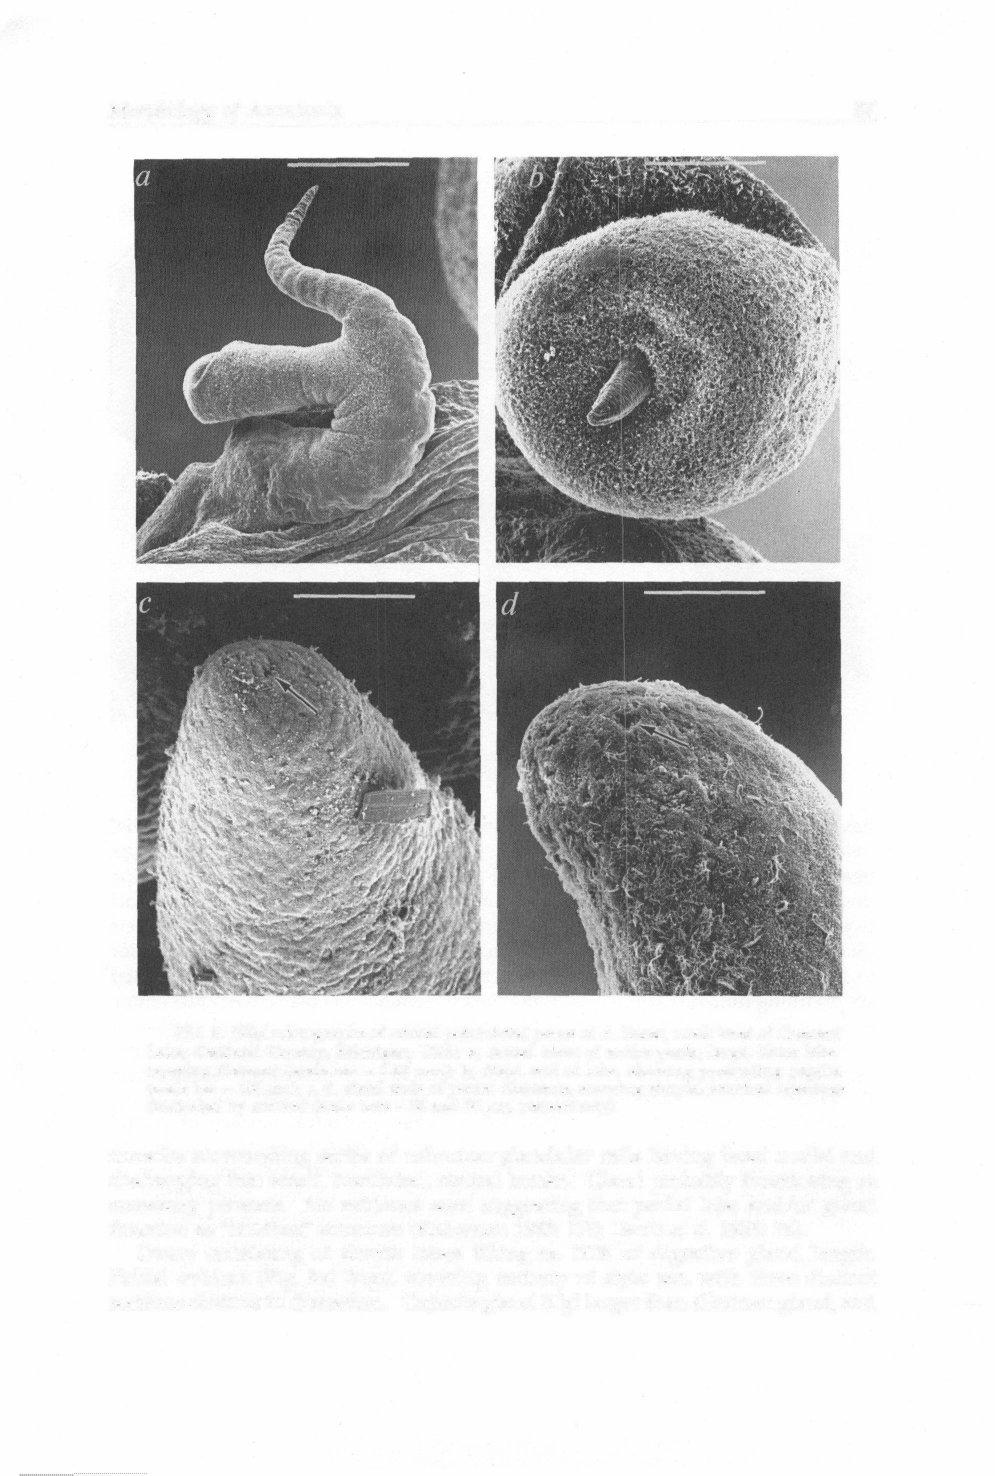 Morphology of Amnicola 87 FIG. 6. SEM micrographs of critical point dried penes of A.